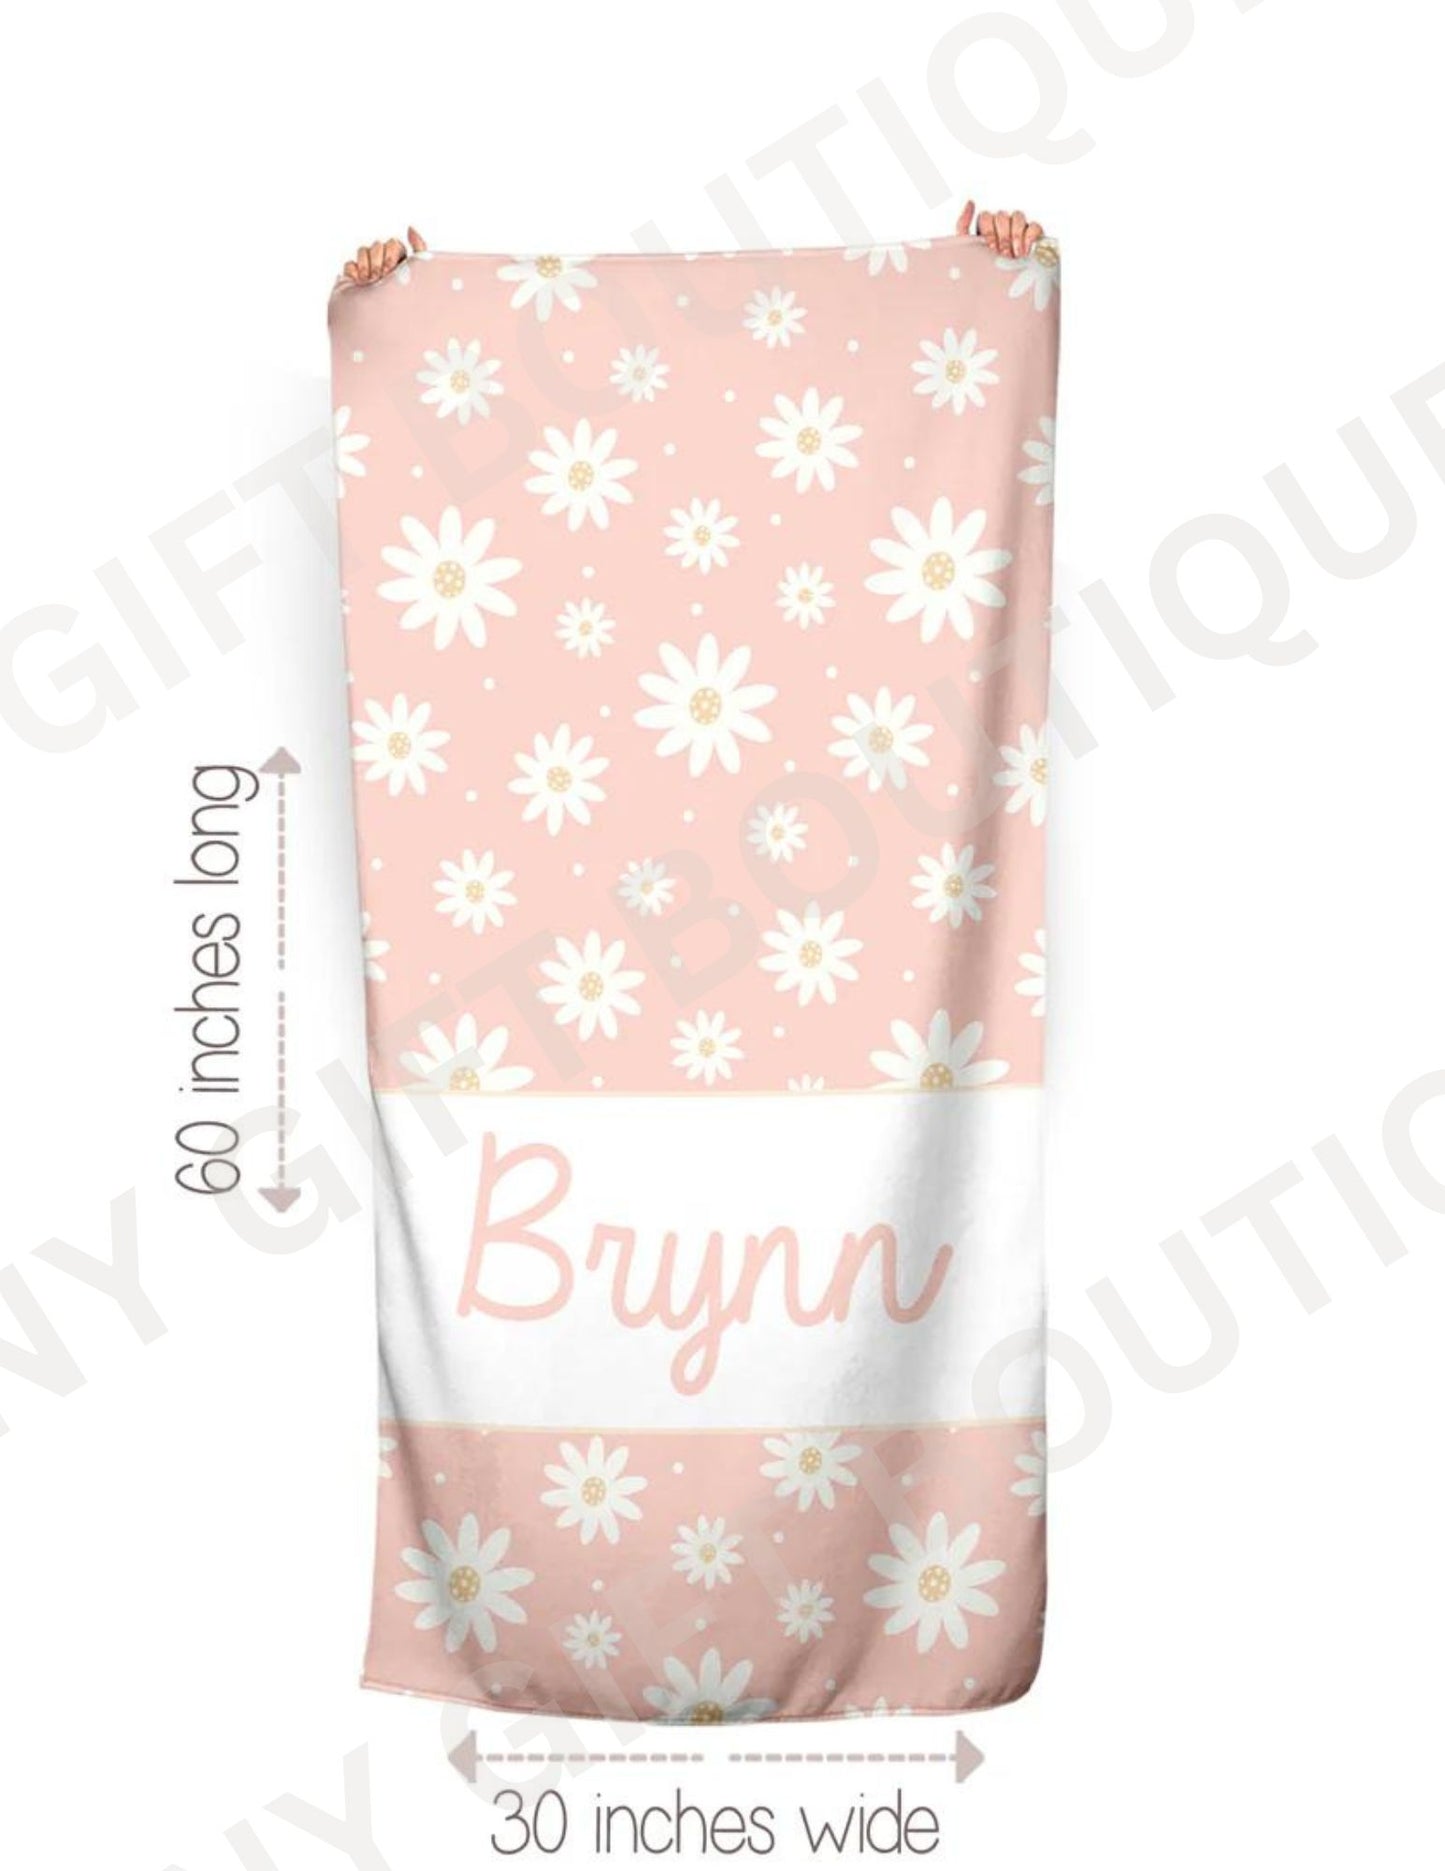 Pretty in Pink Daisy Personalized Beach Towel